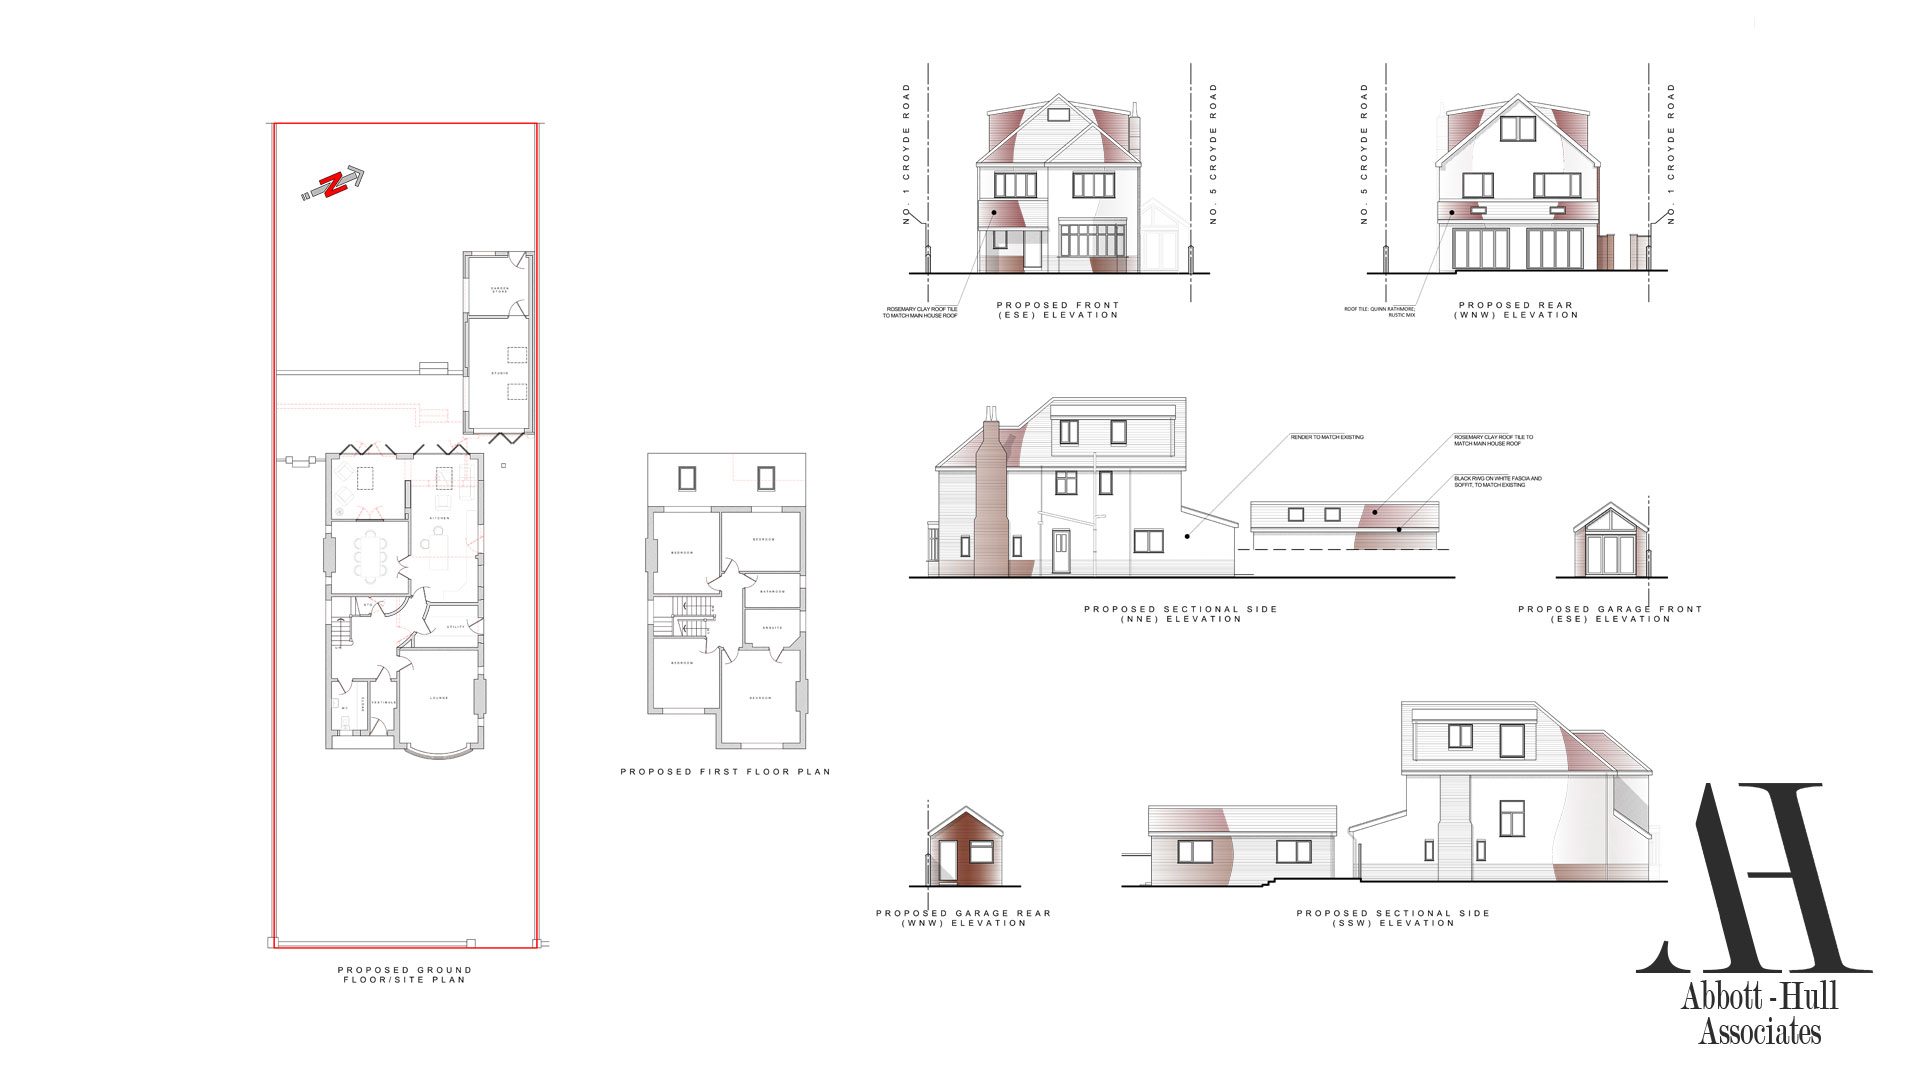 Croyde Road, Lytham St. Annes - Proposed Plans and Elevations